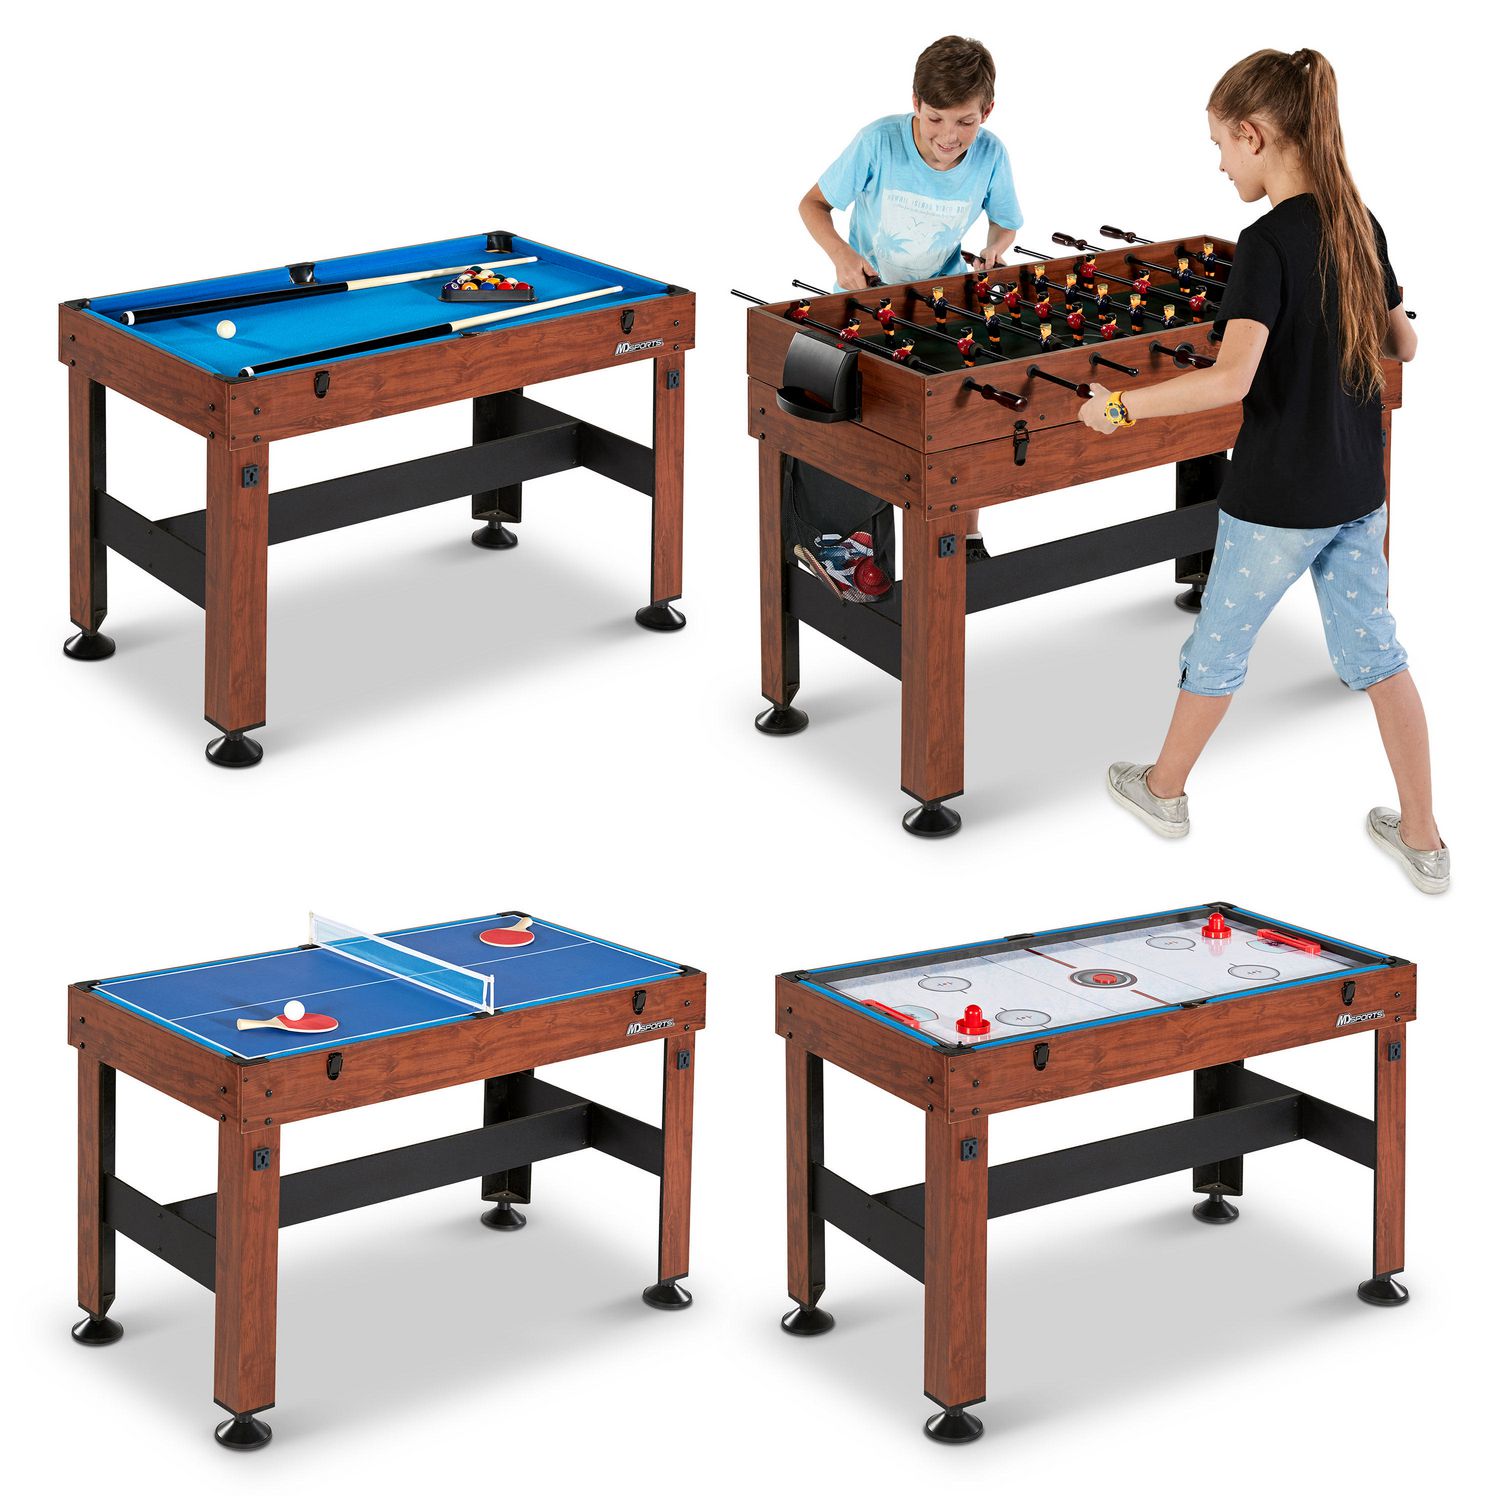 4-in-1 Combo Game Table - Versatile Gaming Delight